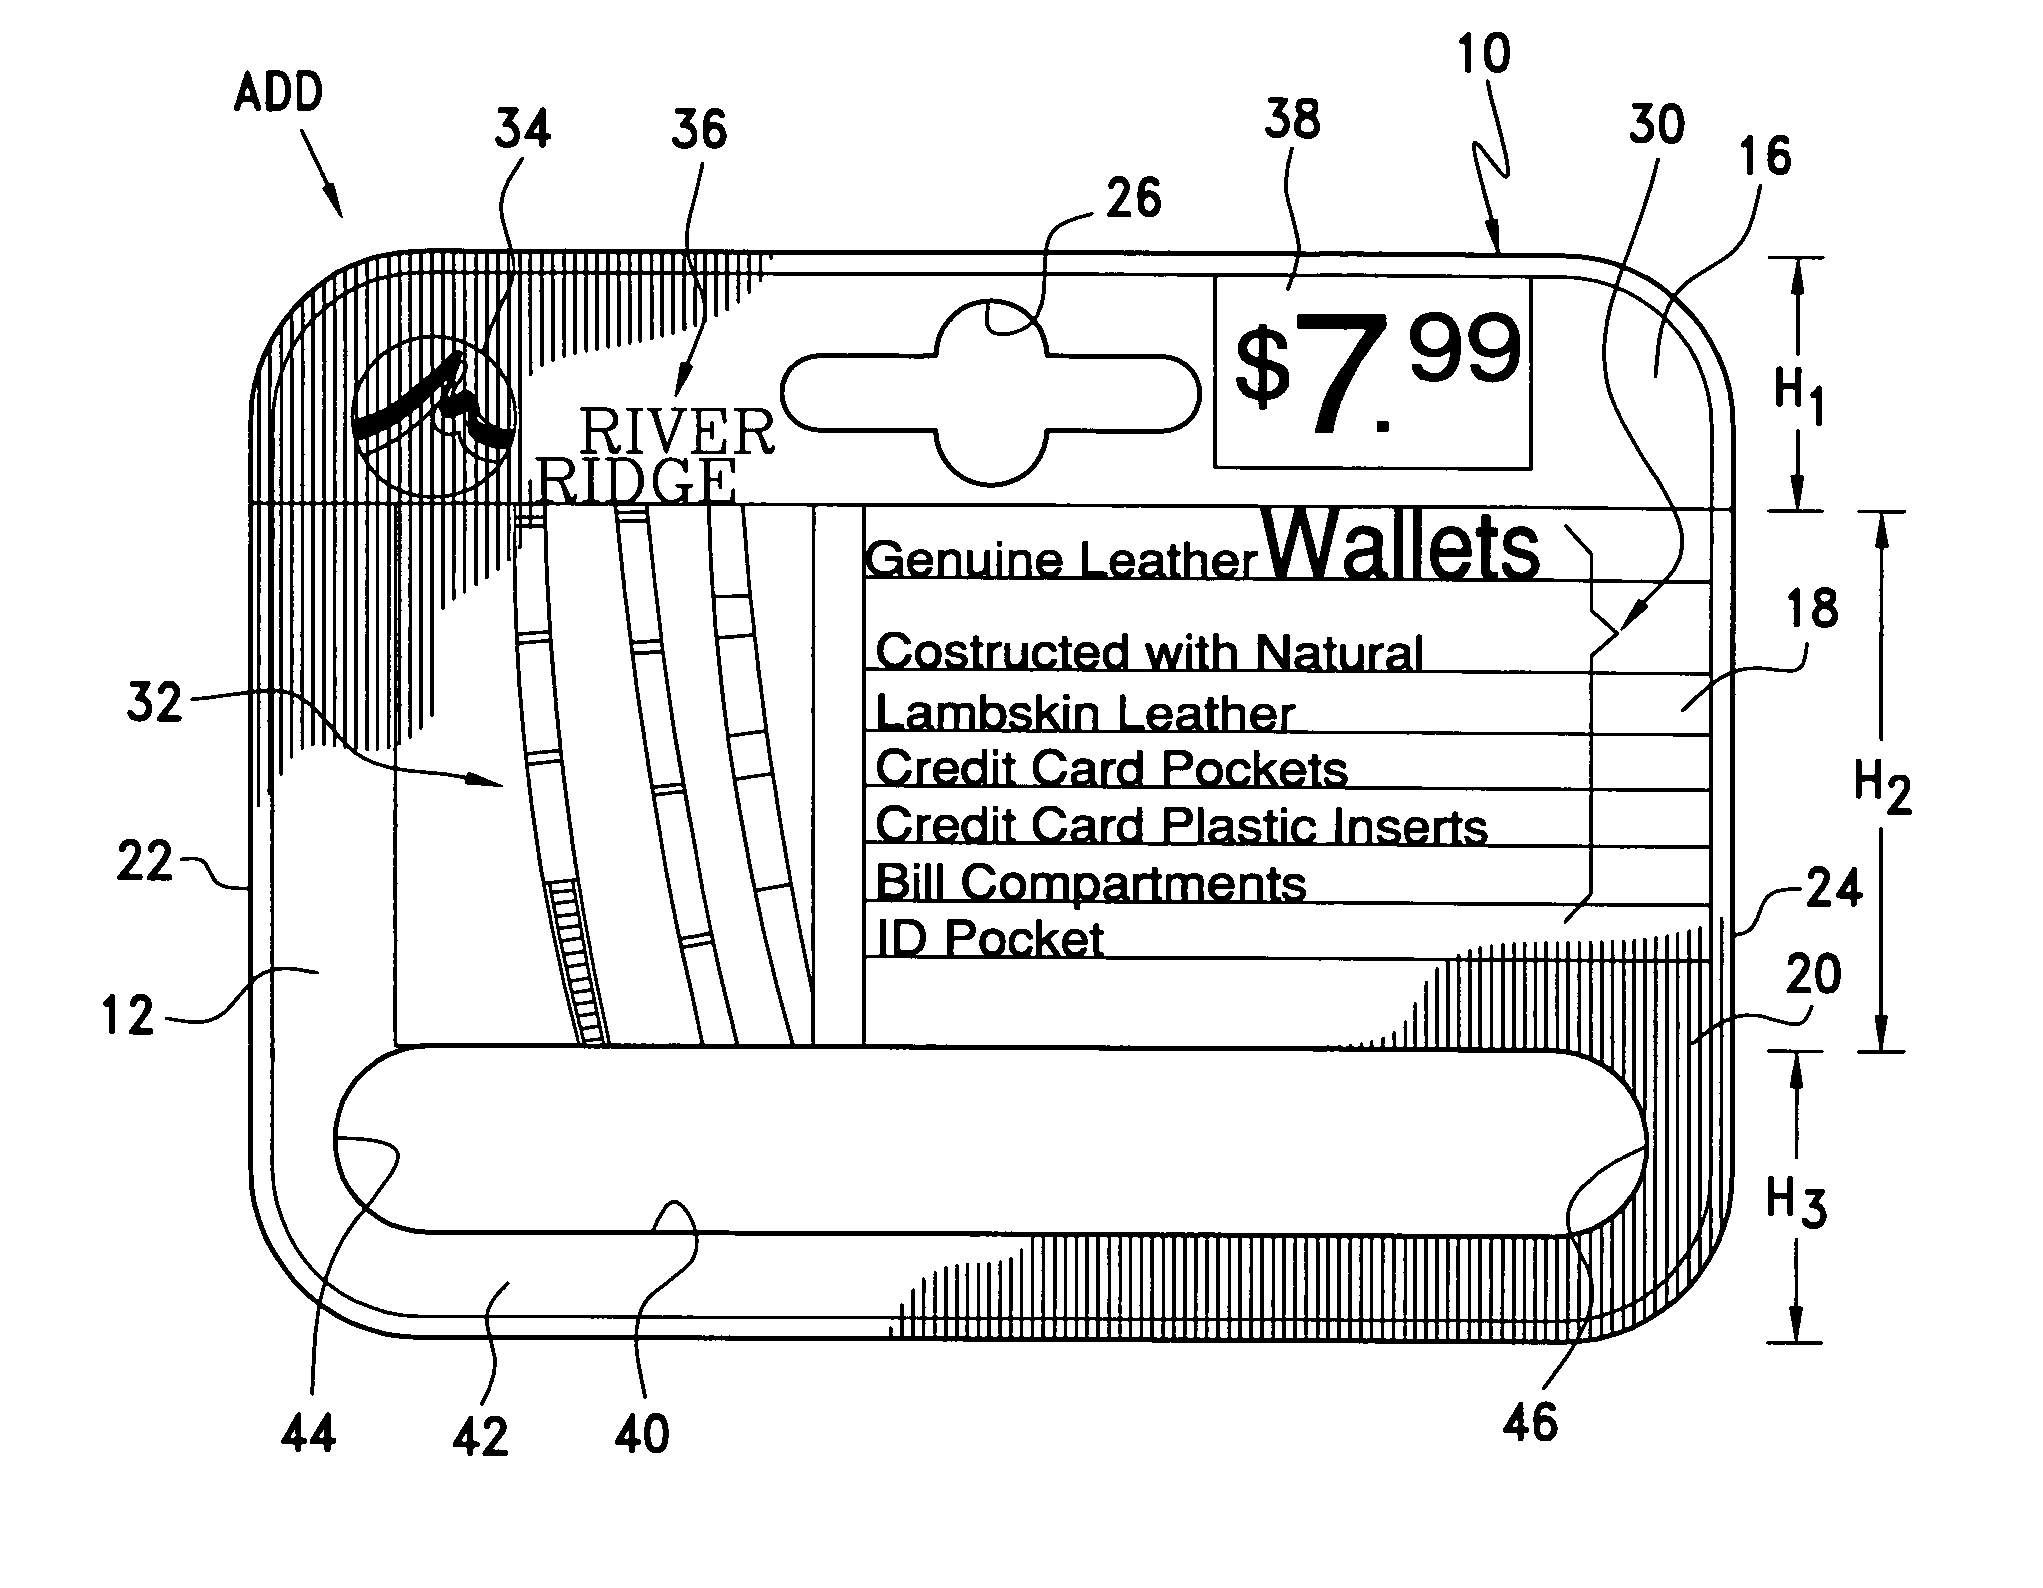 Article display device